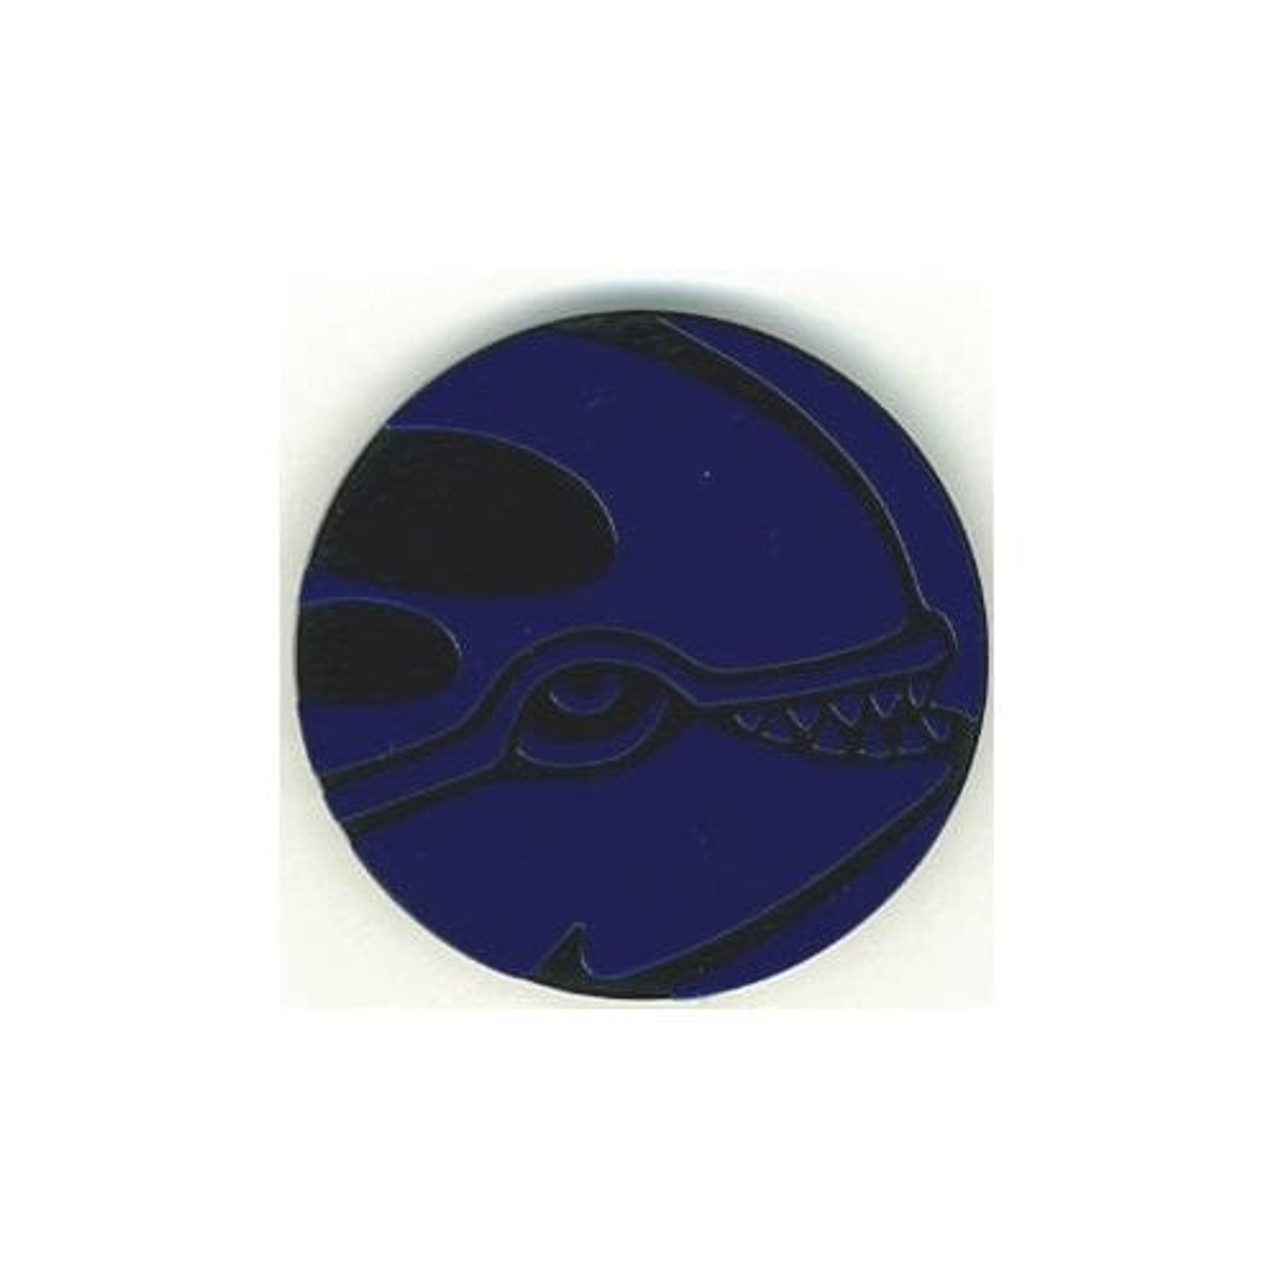 Kyogre Coin from the Pokemon Trading Card Game - Blue : family-gadgets.ru: Toys & Games